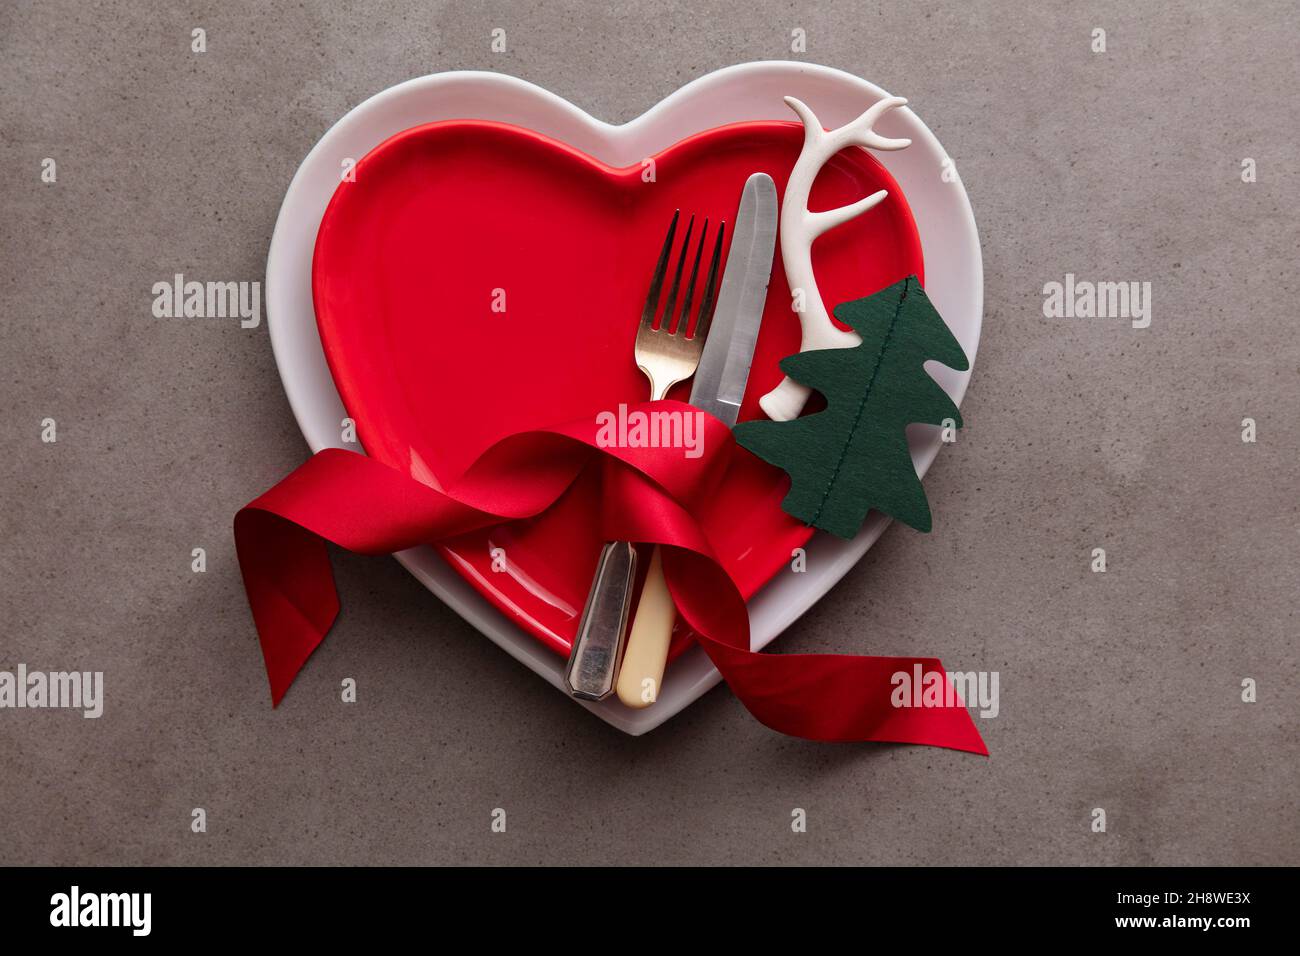 Festive Christmas meal background. Heart shaped plate with knife and fork and Christmas antler and tree decorations Stock Photo